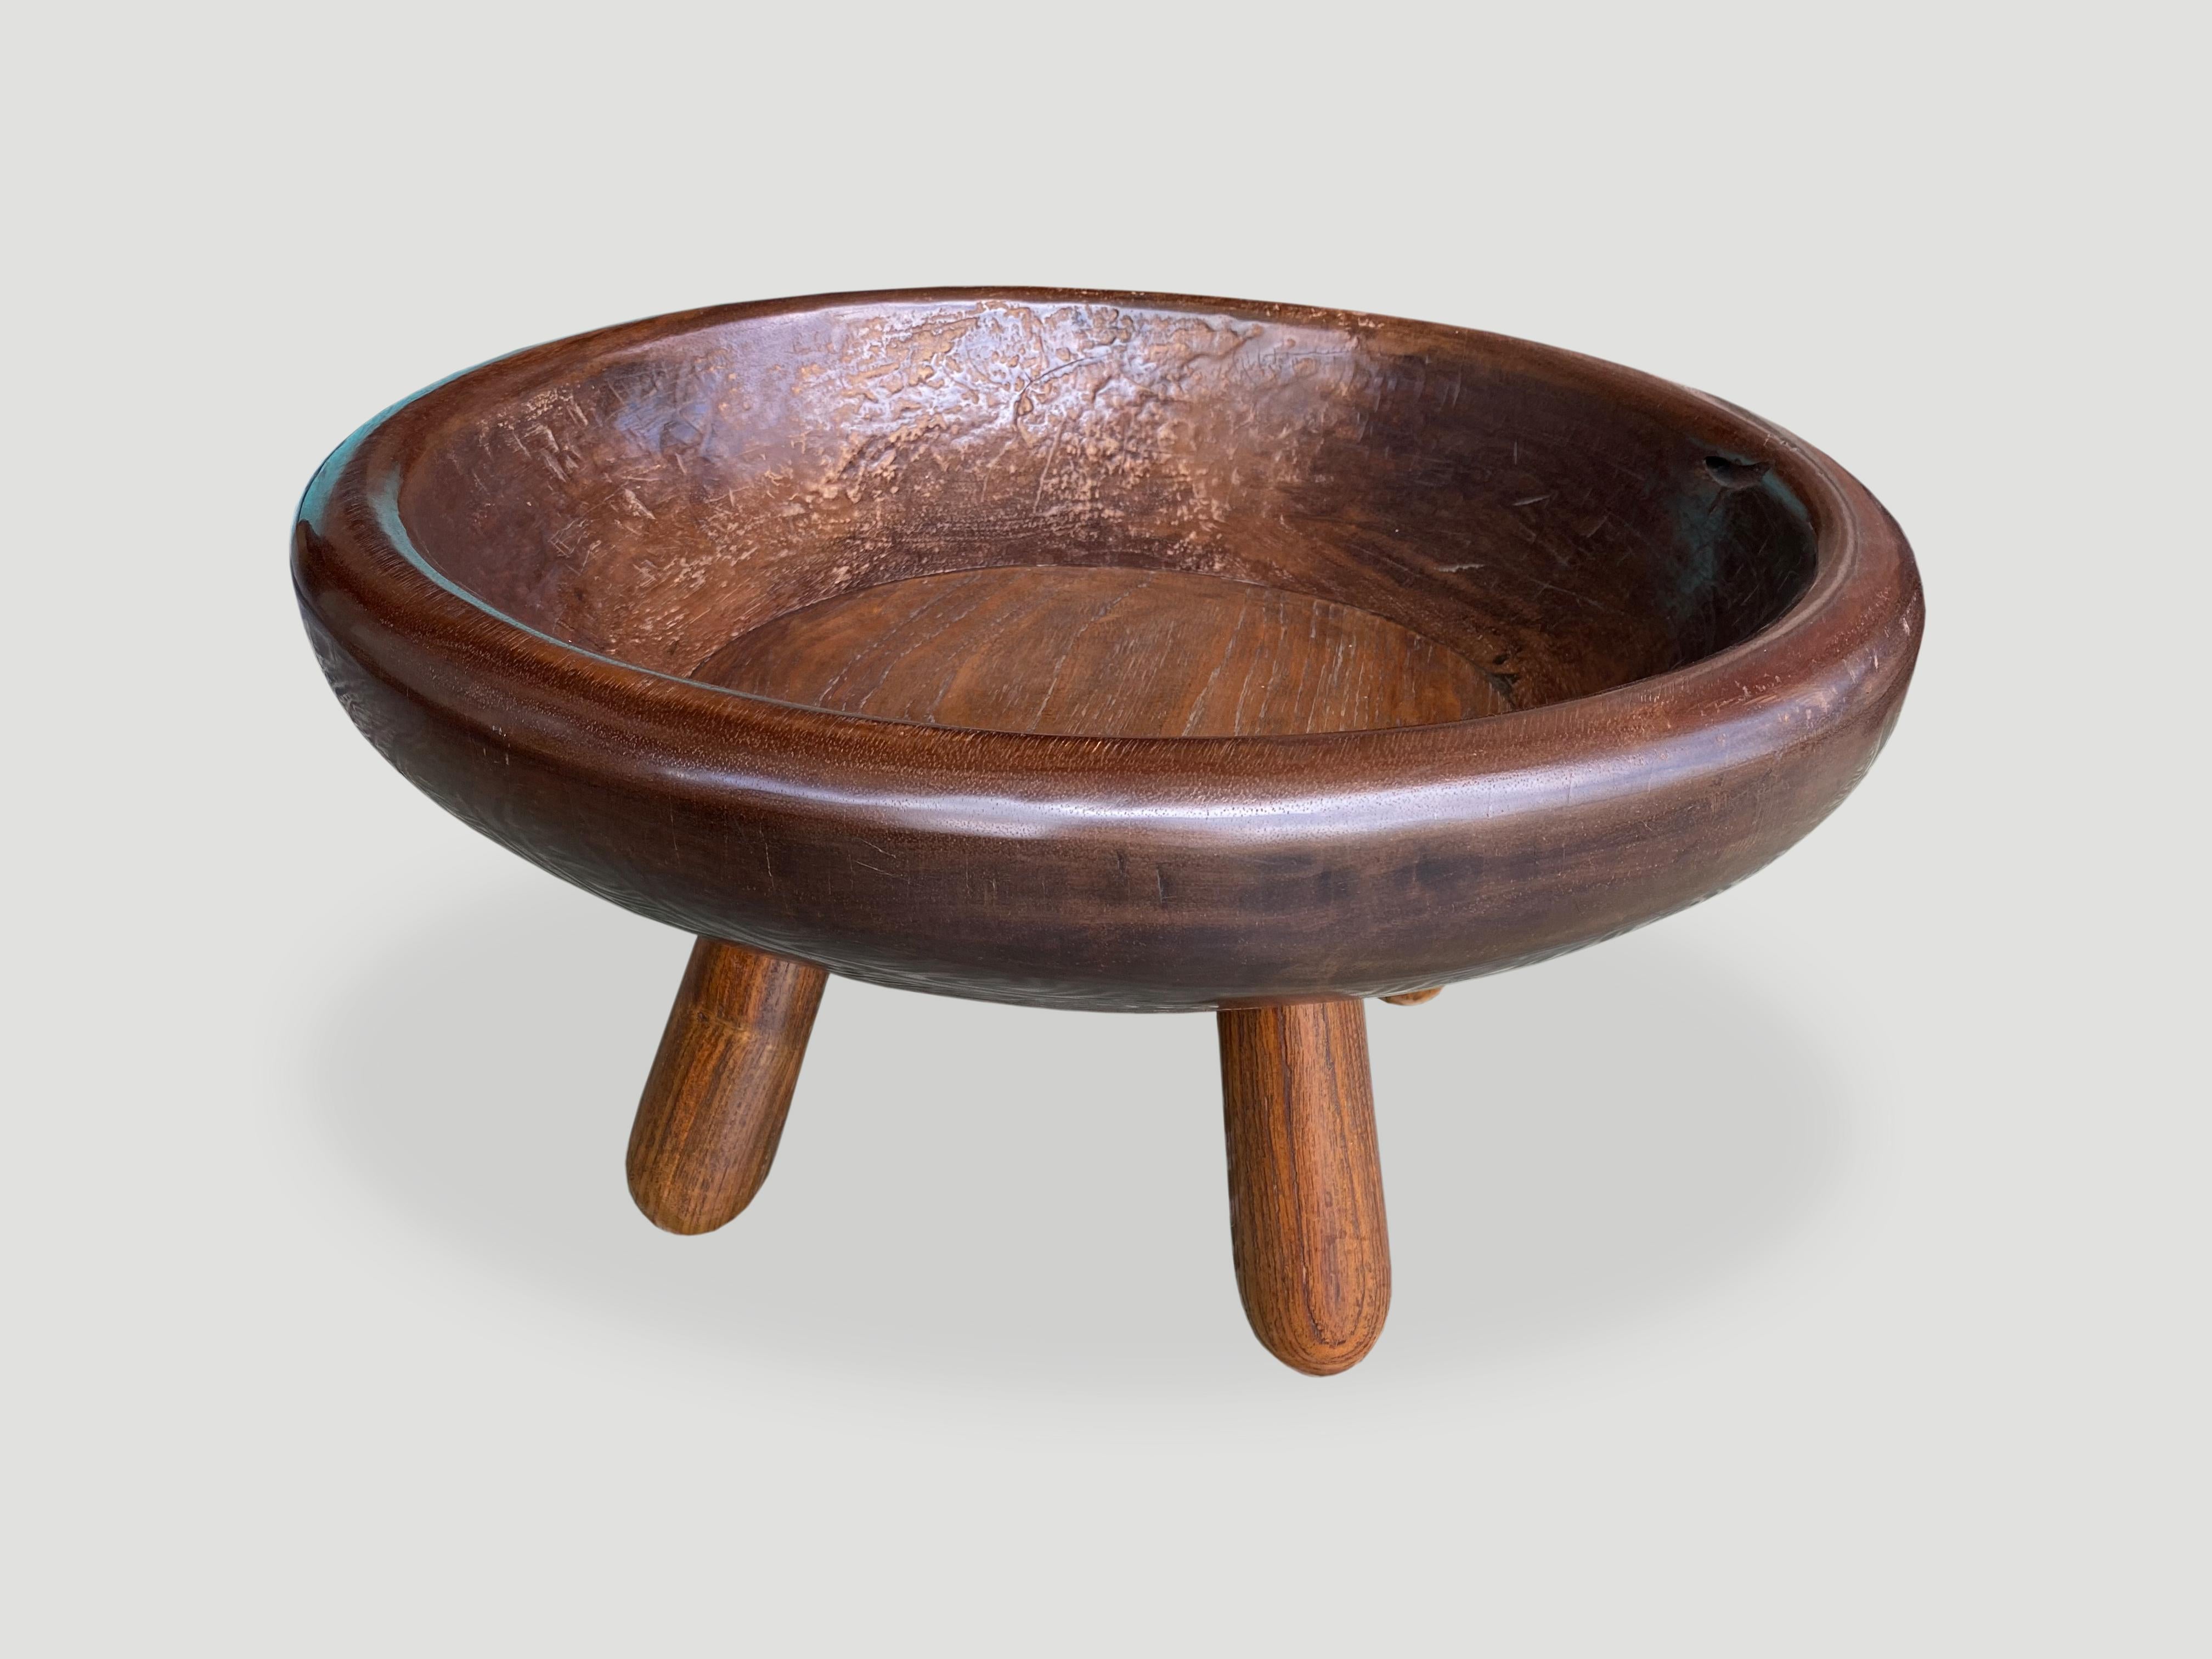 Introducing the midcentury Couture Collection new to 2021. Taken from my finest collection, a beautiful century old merbau wood bowl from Sumatra with stunning patina. We added midcentury style rounded teak legs. Perfect in a bathroom or spa for